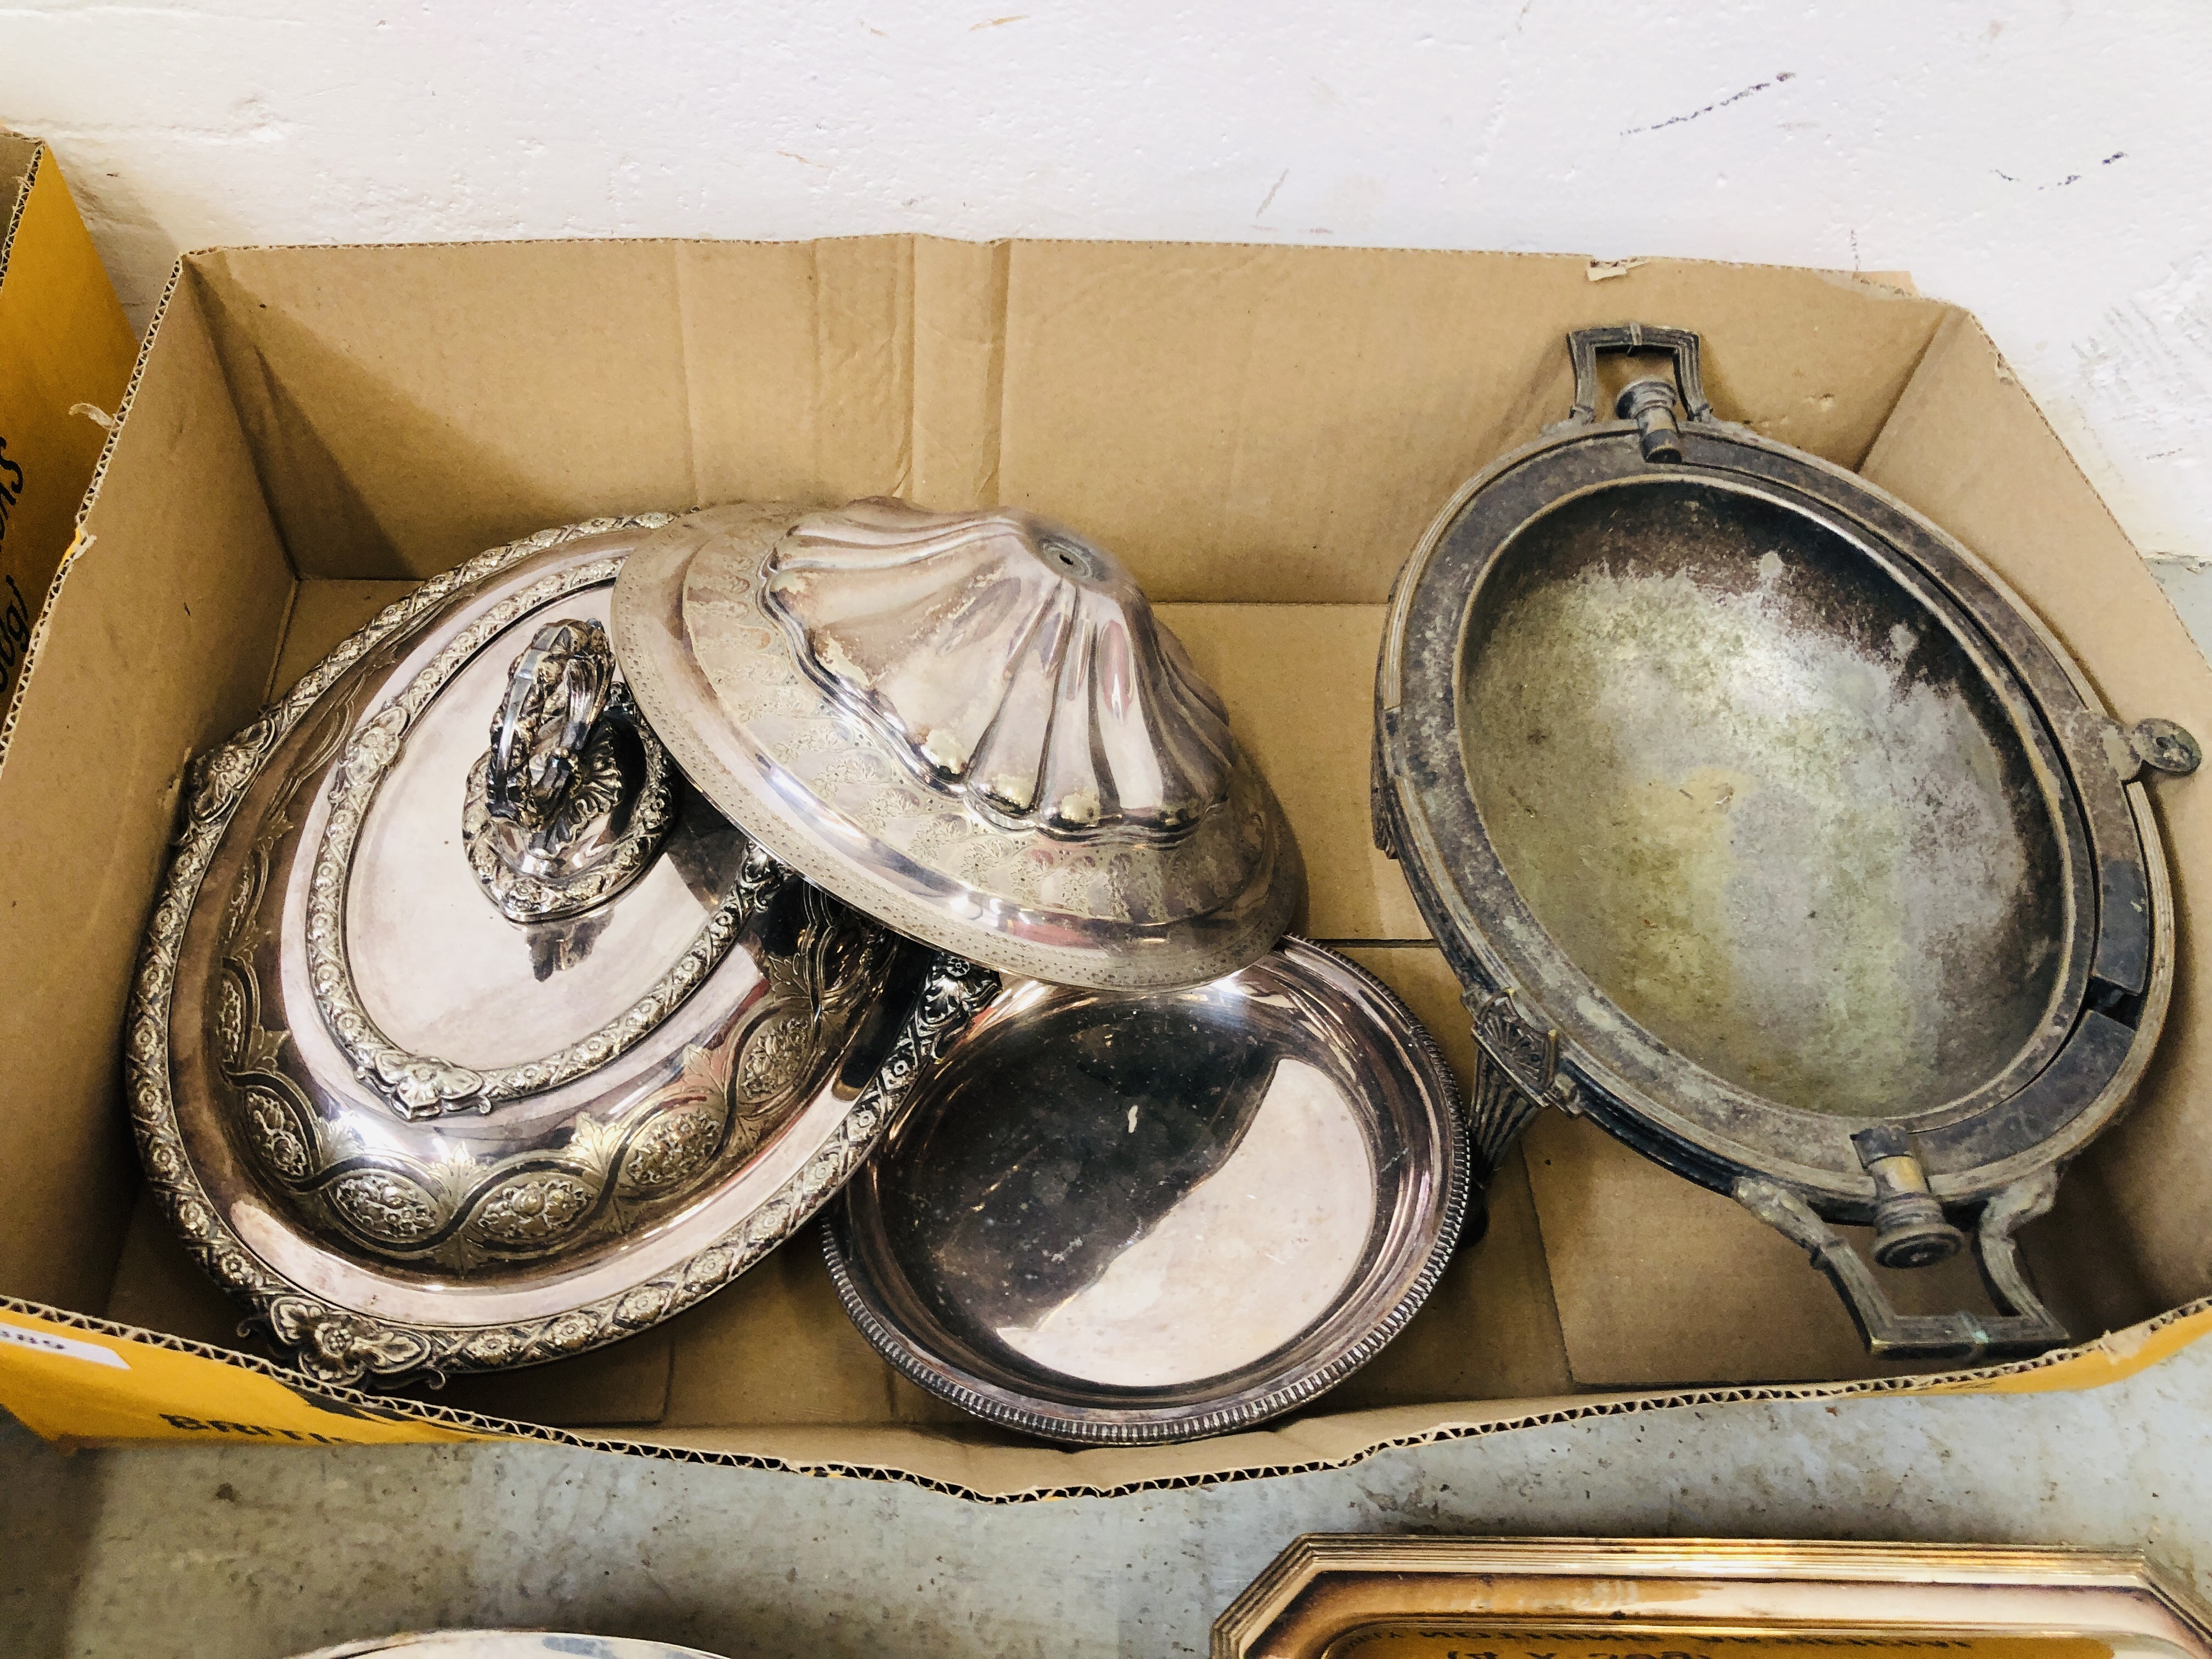 TWO BOXES CONTAINING AN EXTENSIVE COLLECTION OF SILVER PLATED TUREENS AND HANDLES, TWO HANDLED TRAY, - Image 6 of 7